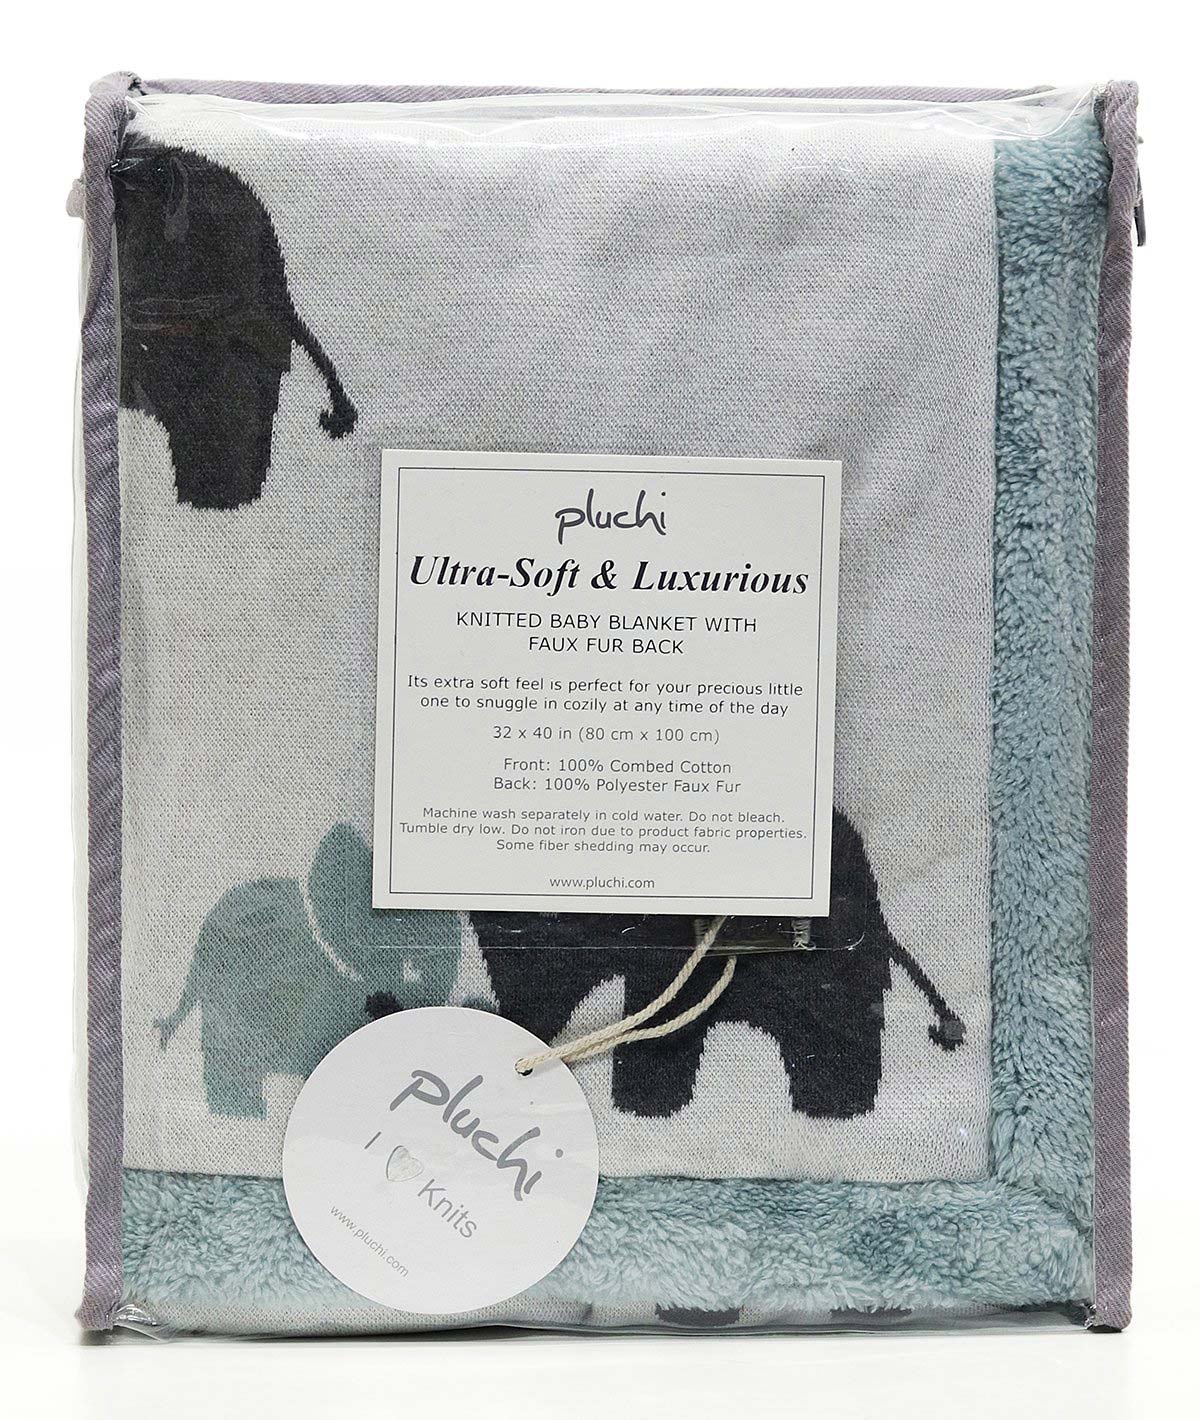 Indian Elephant - Ivory & Indus Blue Color Cotton Knitted Blanket with Faux Fur Back for Babies